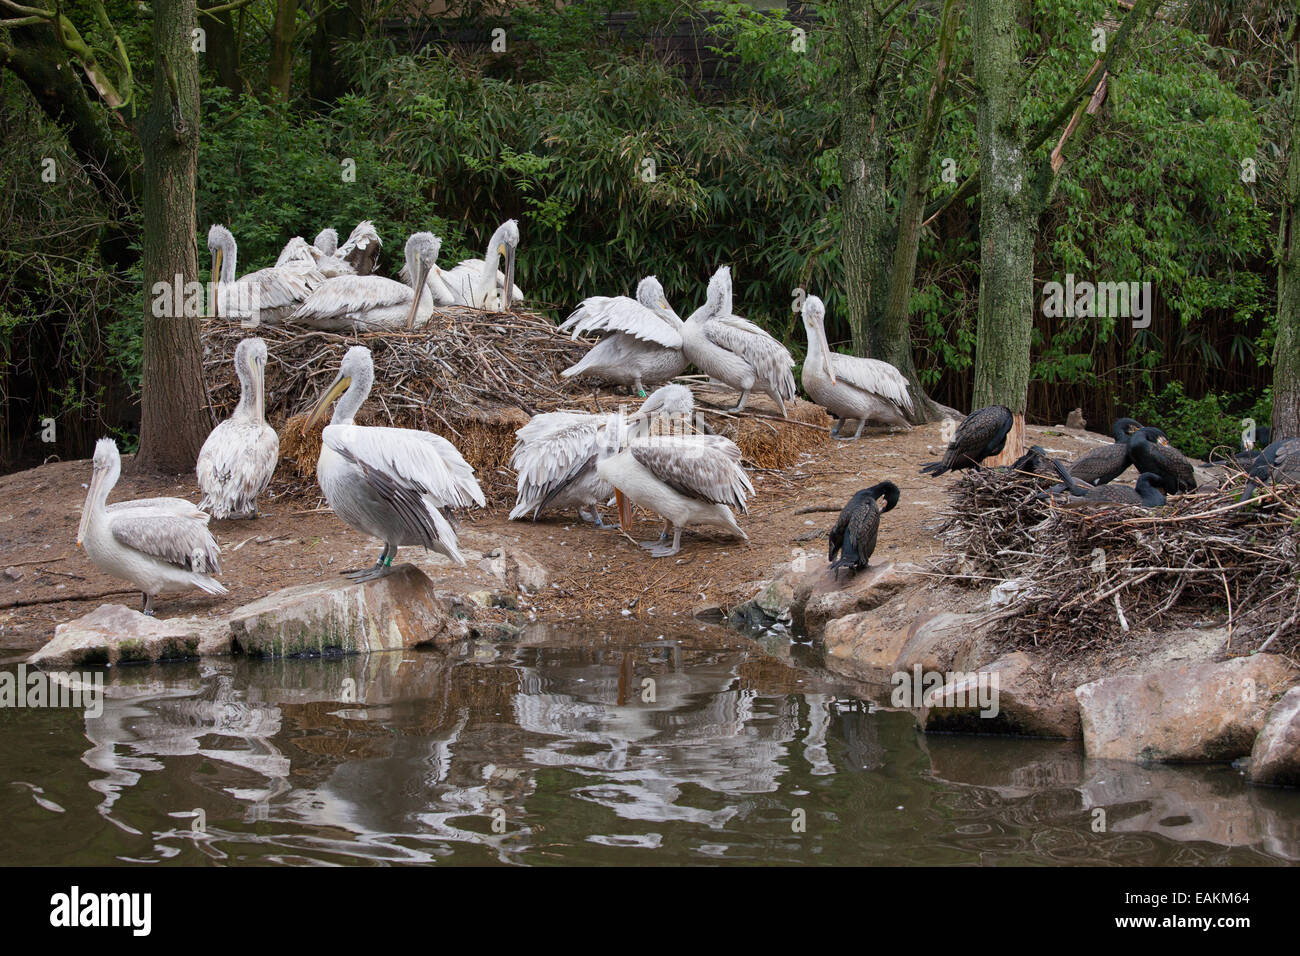 Dalmatian Pelicans (Pelecanus crispus) and their nests on pond island in the Rotterdam Zoo in Holland, Netherlands. Stock Photo